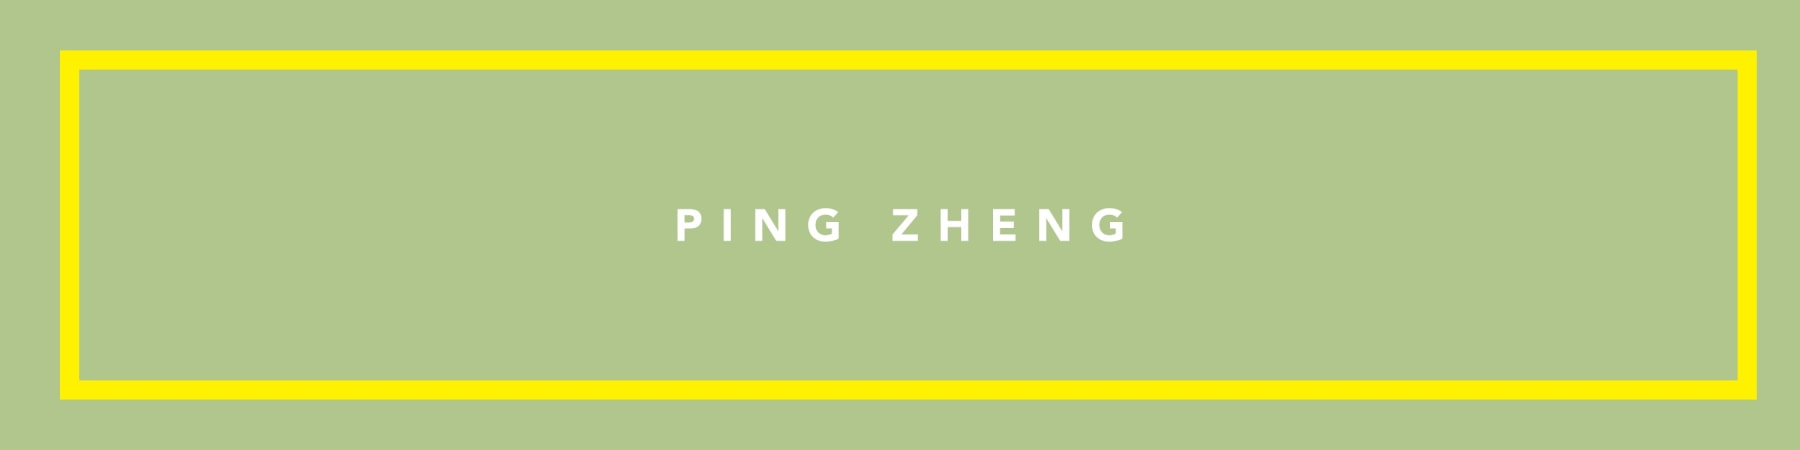 PING ZHENG | LOOK INTO THE FUTURE - JUNE 24–AUGUST 29, 2020 - Viewing Room - McClain Gallery Viewing Room